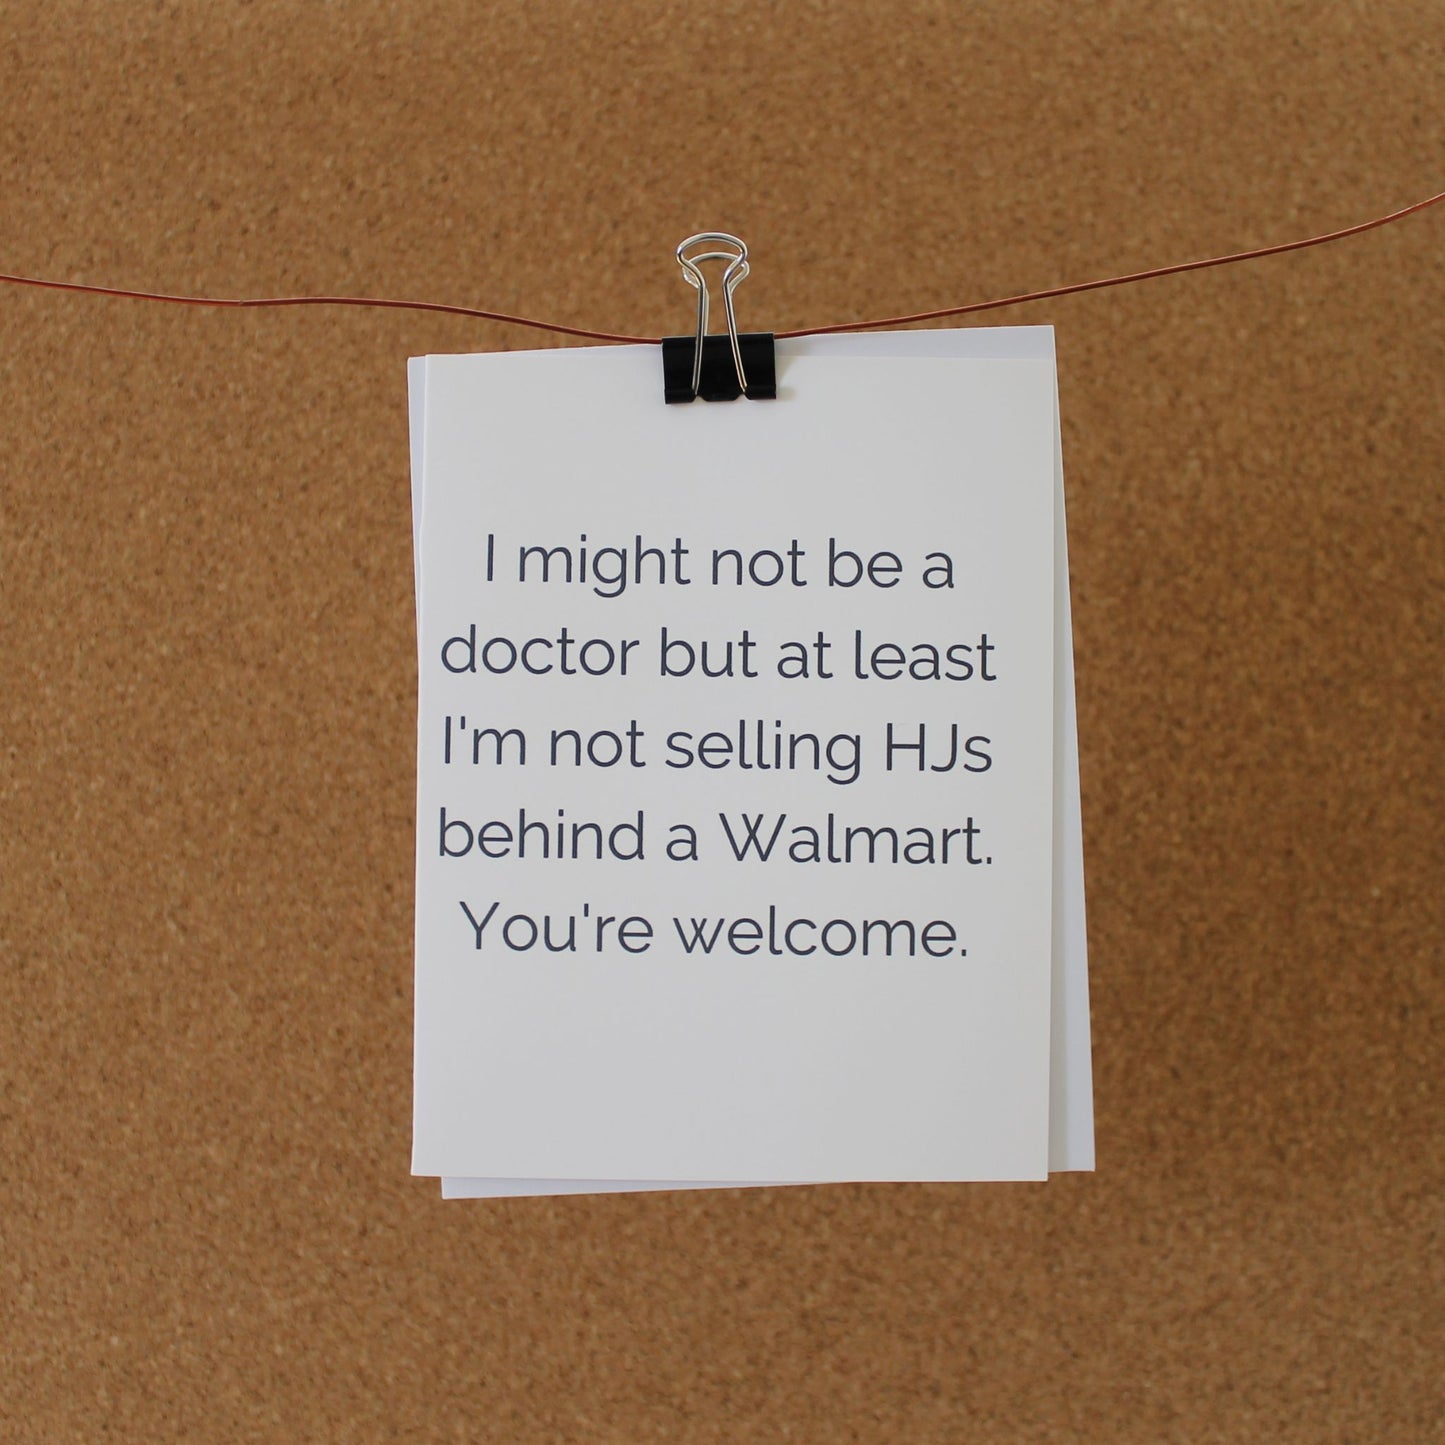 Funny Mother's/Father's Day Card: "I might not be a doctor but at least I'm not selling HJs behind a Walmart. You're welcome."